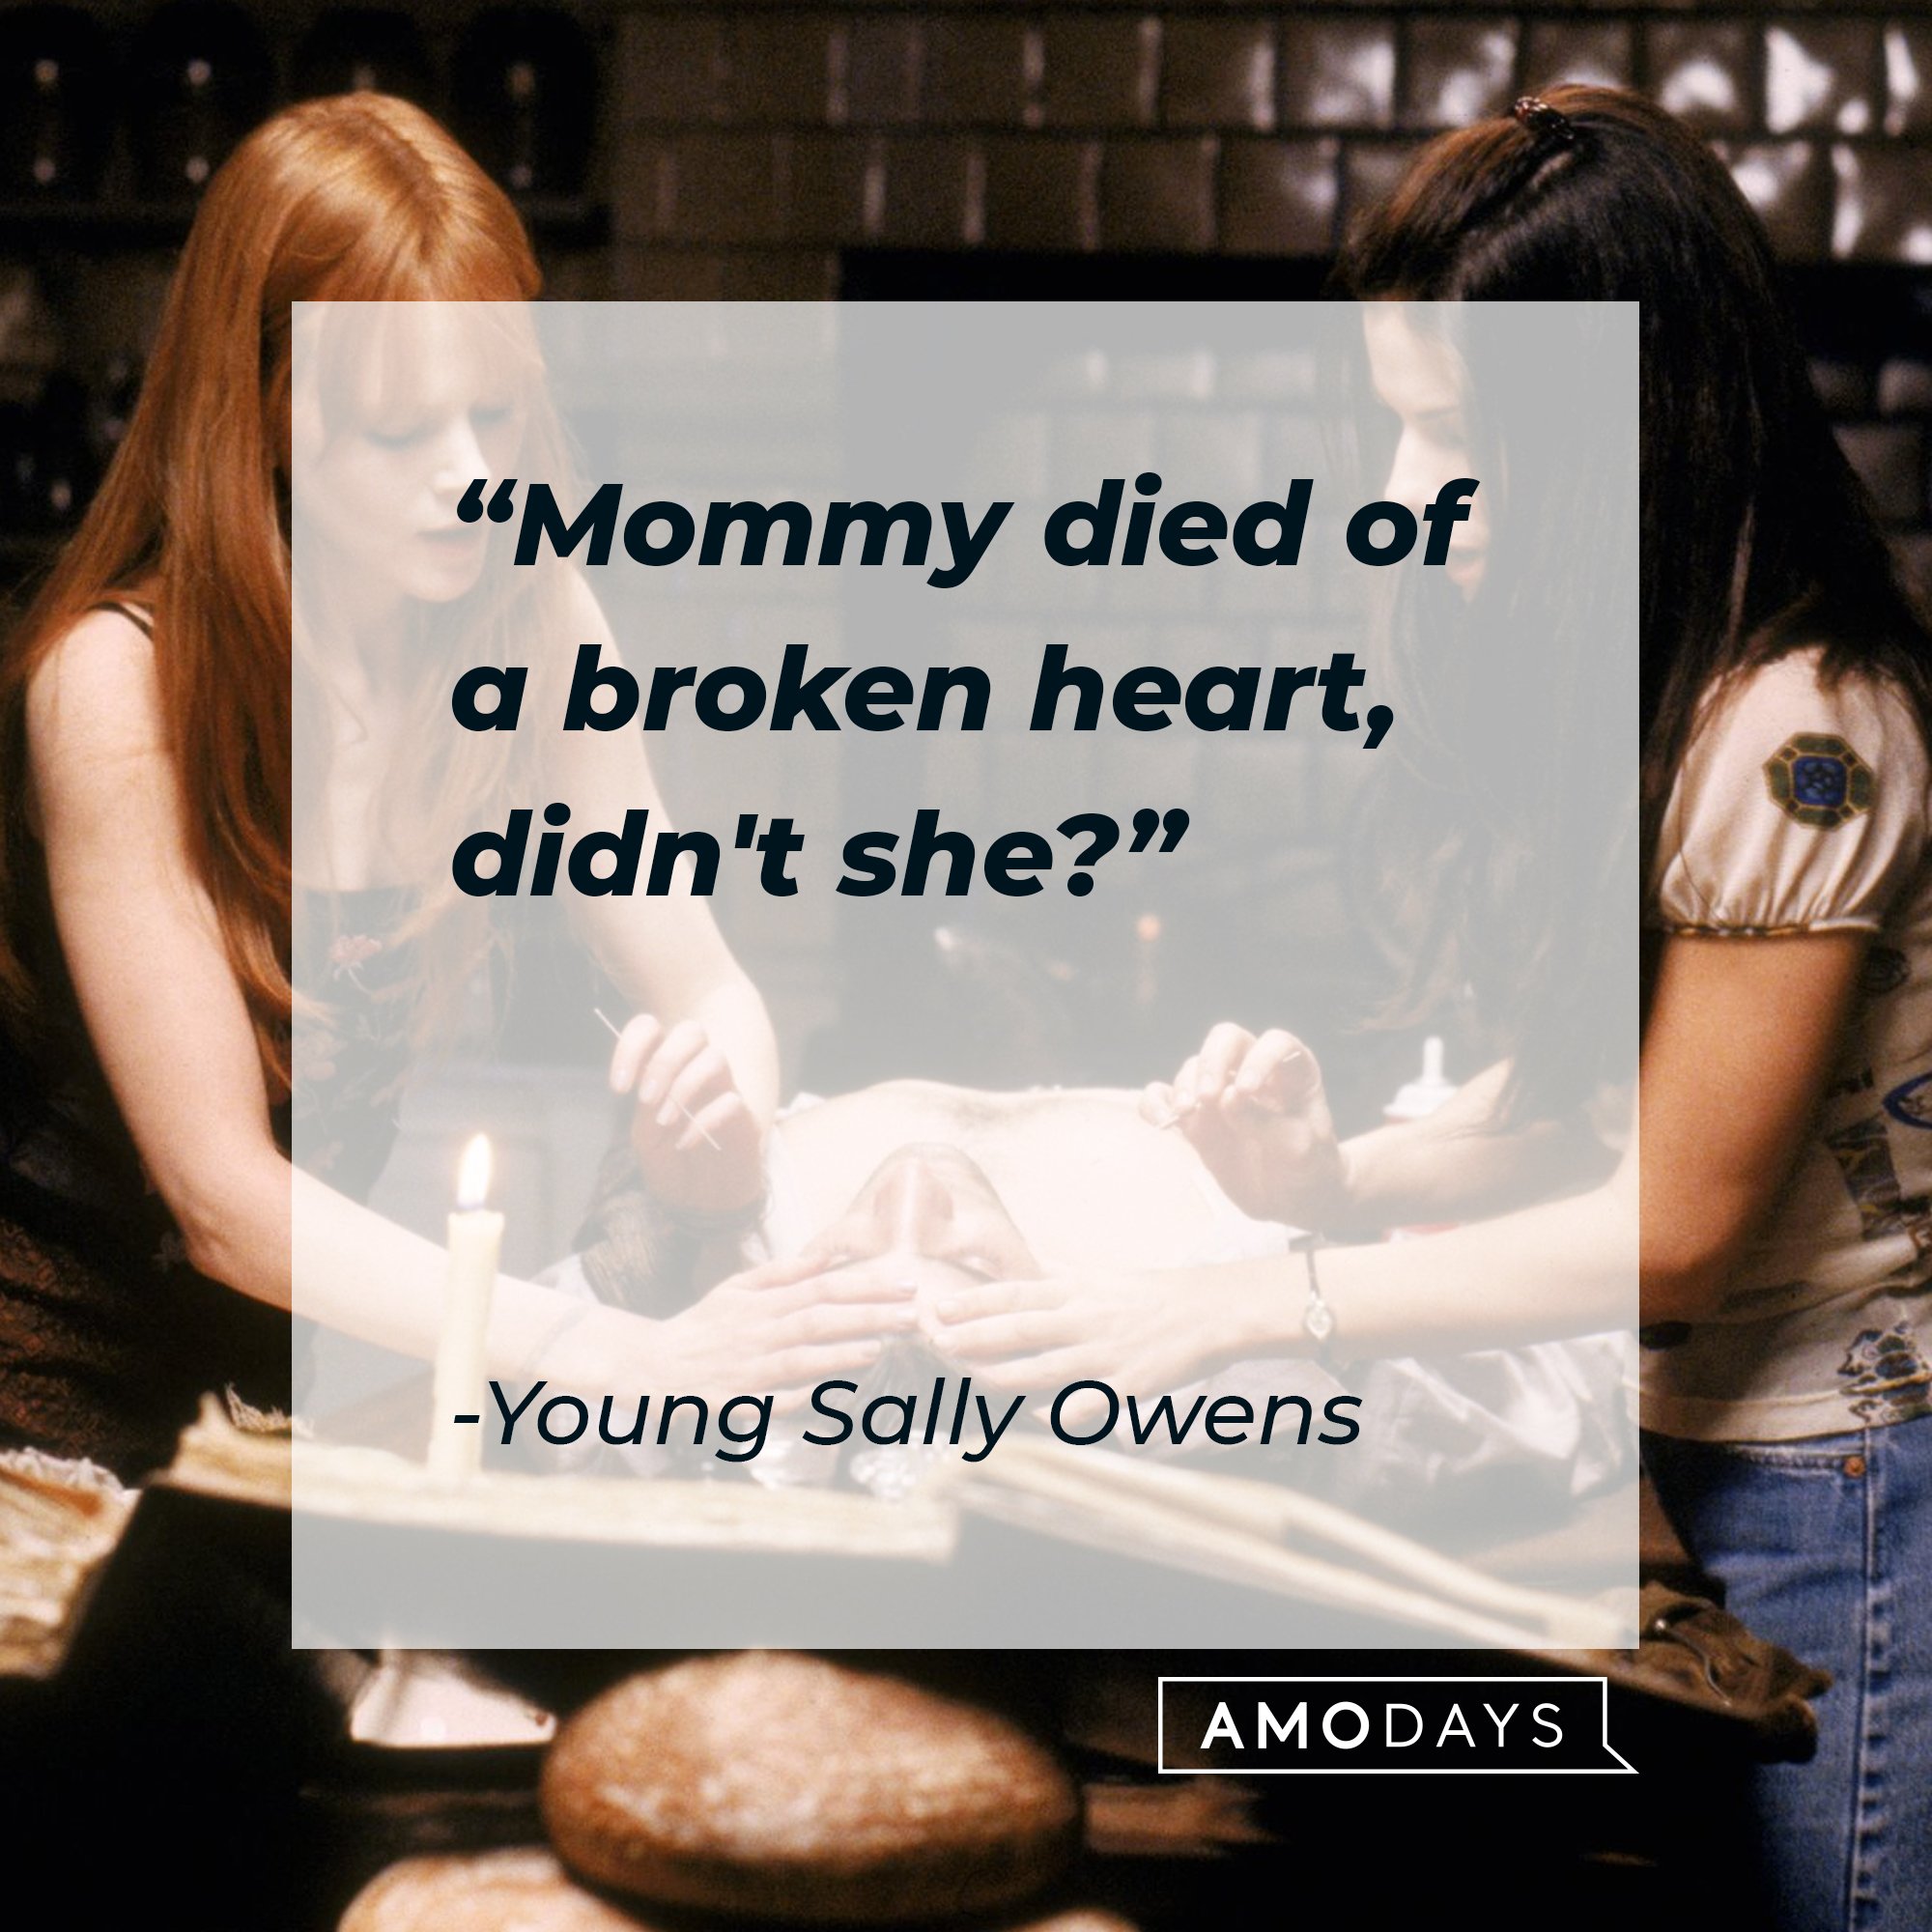 Young Sally Owens’ quote: "Mommy died of a broken heart, didn't she?" | Image: AmoDays